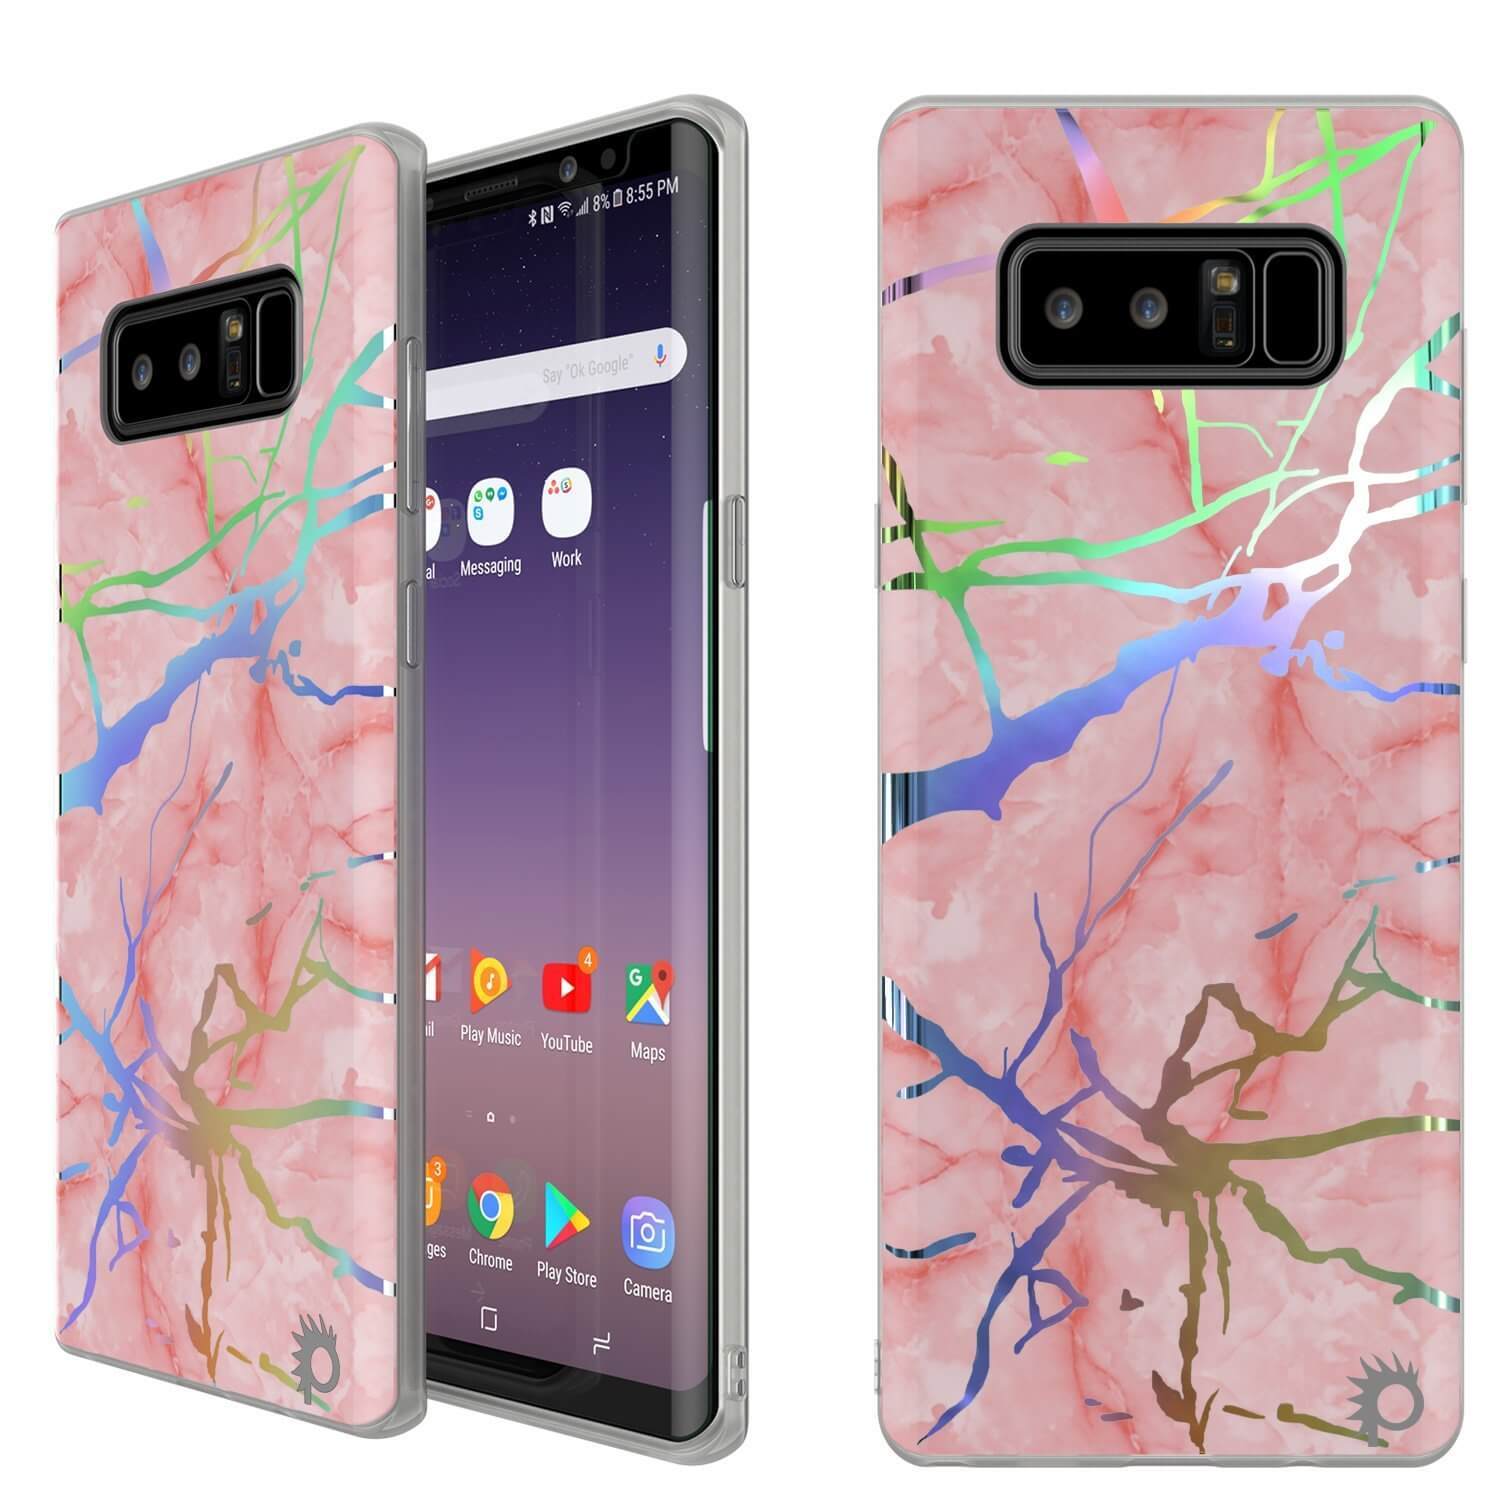 Galaxy Note 8 Marble Case, Protective Full Body Cover [ROSE MIRAGE]